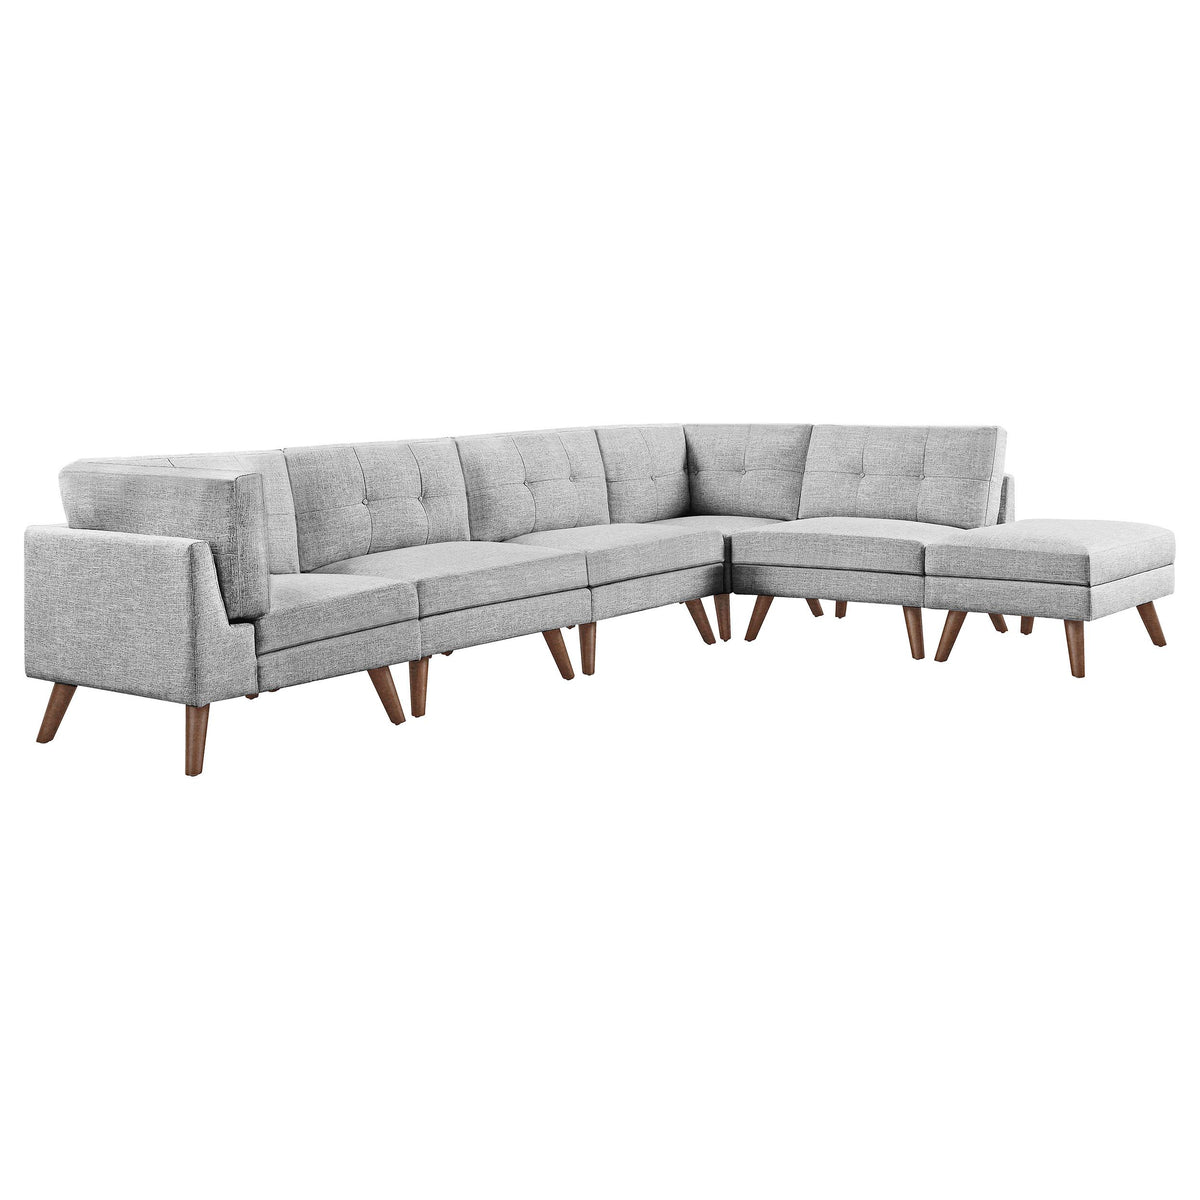 Churchill 6-piece Upholstered Modular Tufted Sectional Grey and Walnut  Half Price Furniture